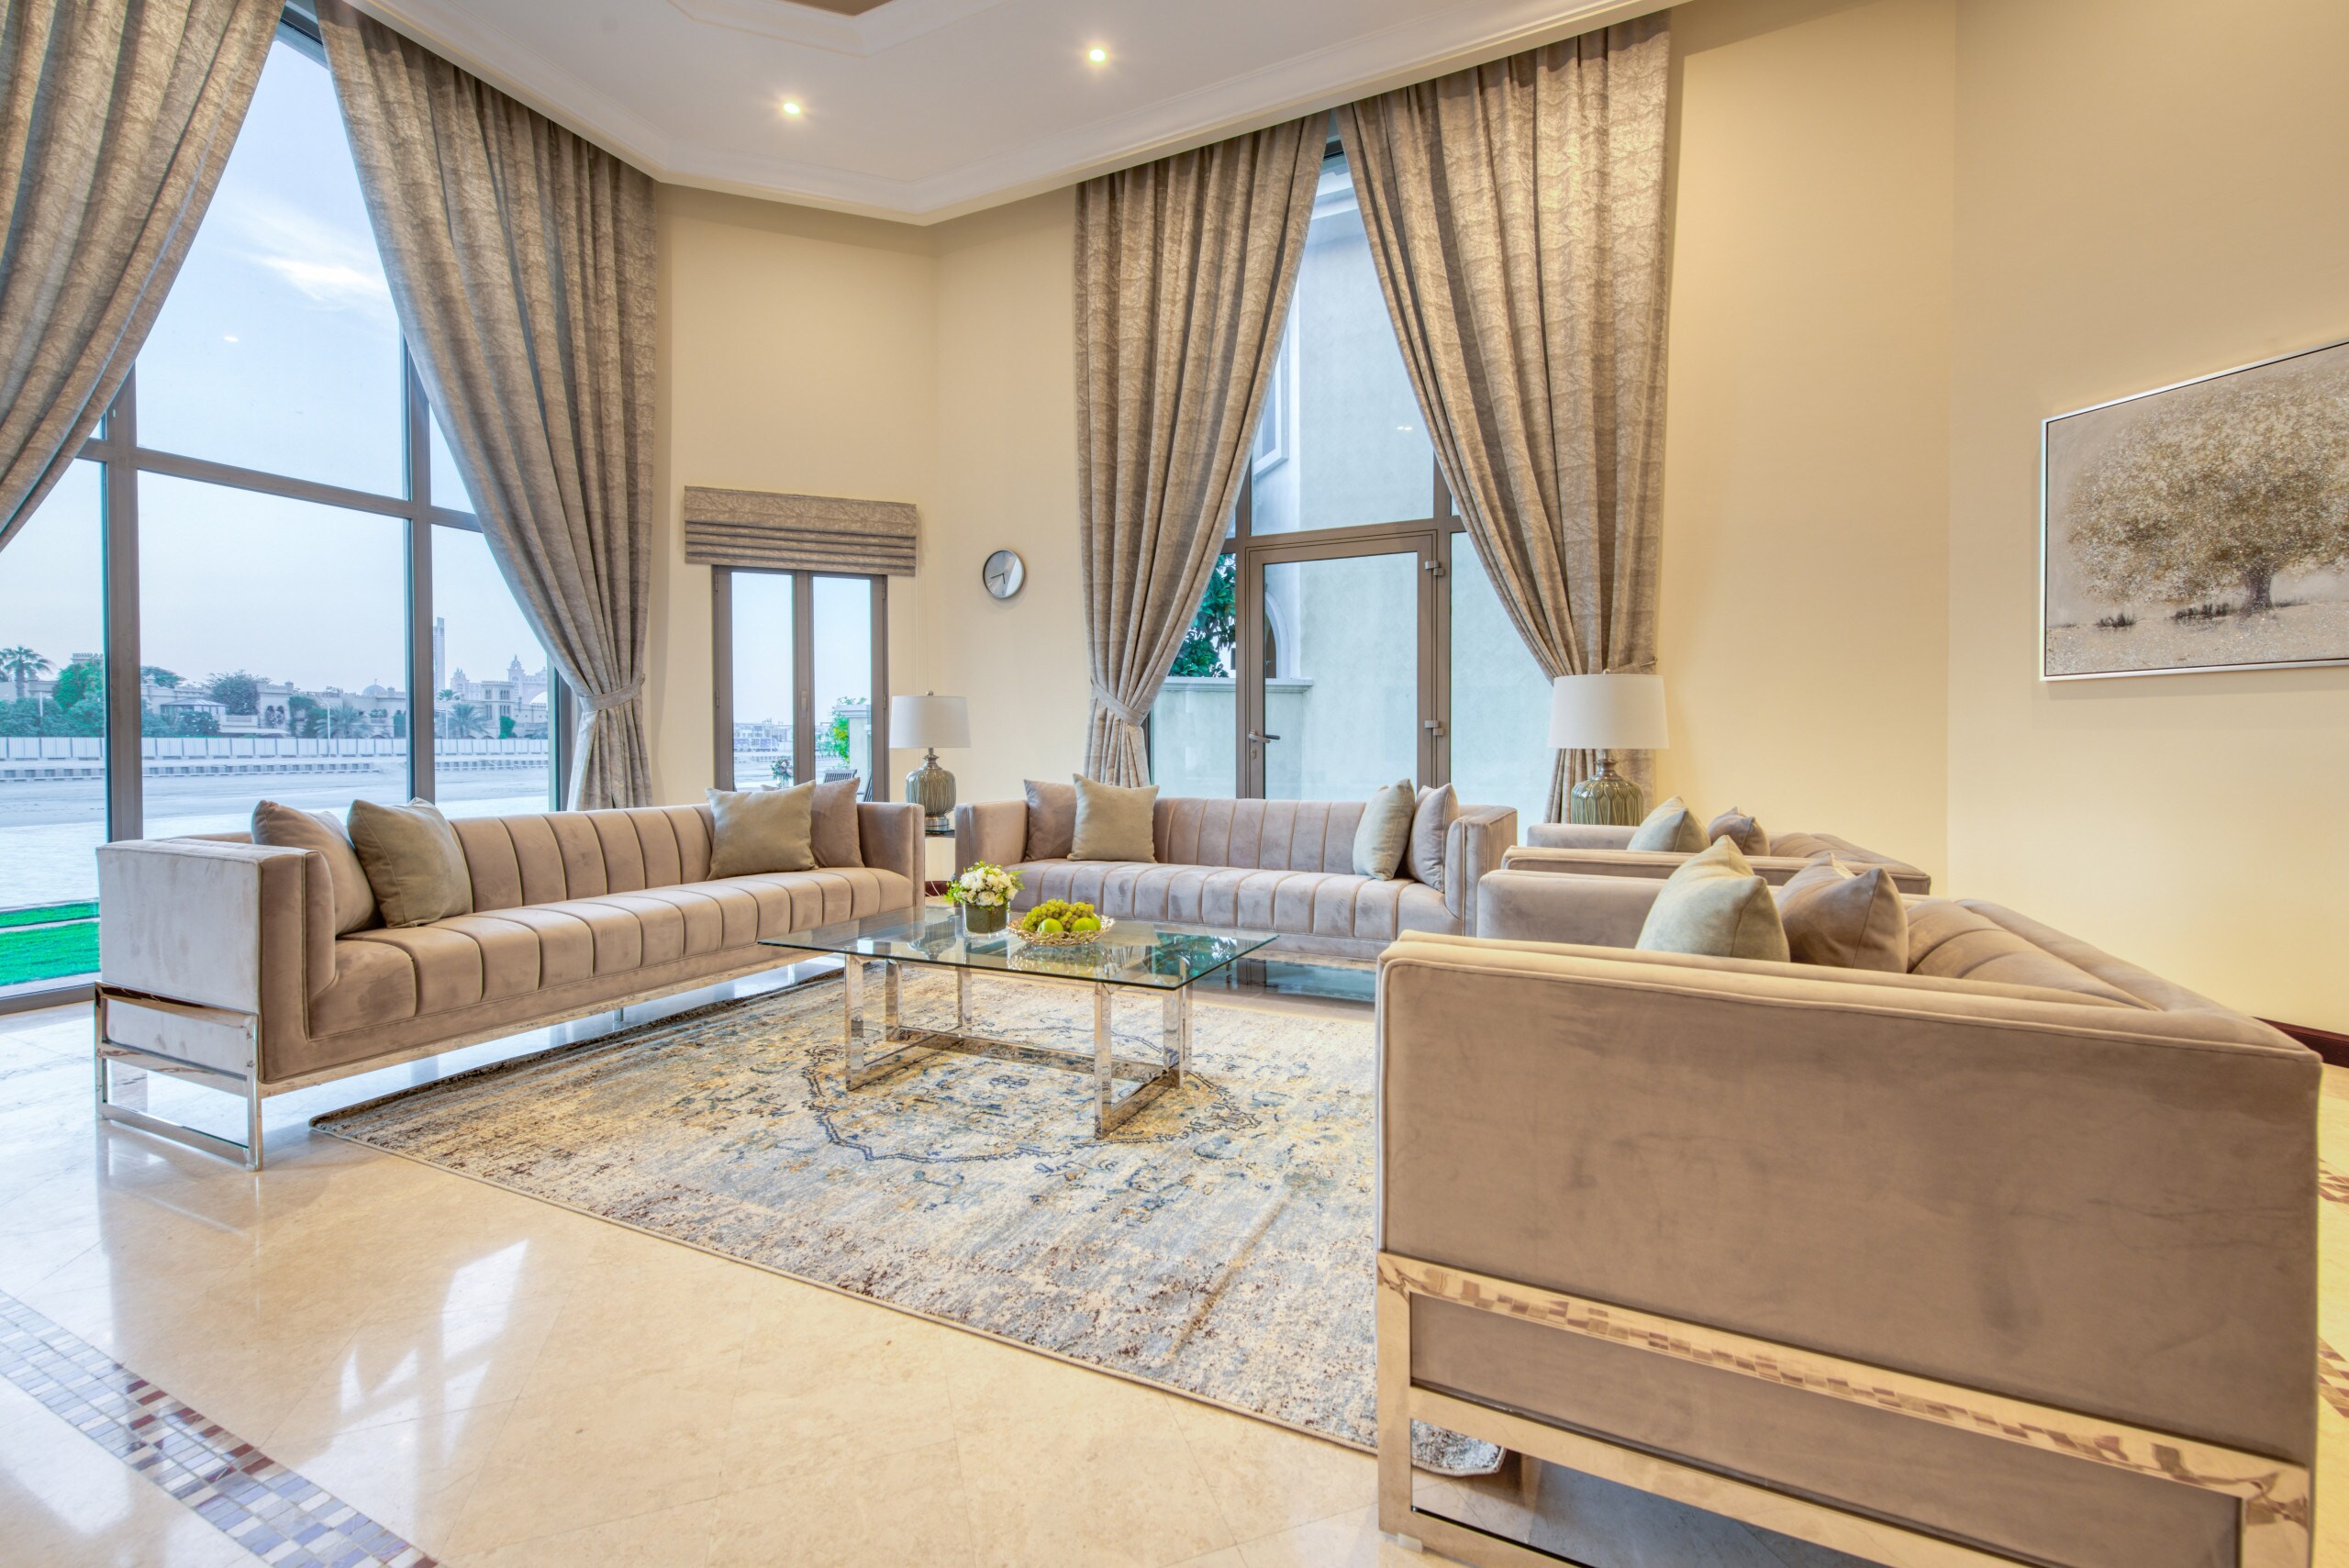 Property Image 2 - Gorgeous 5BR Villa with Private Pool on Palm Jumeirah